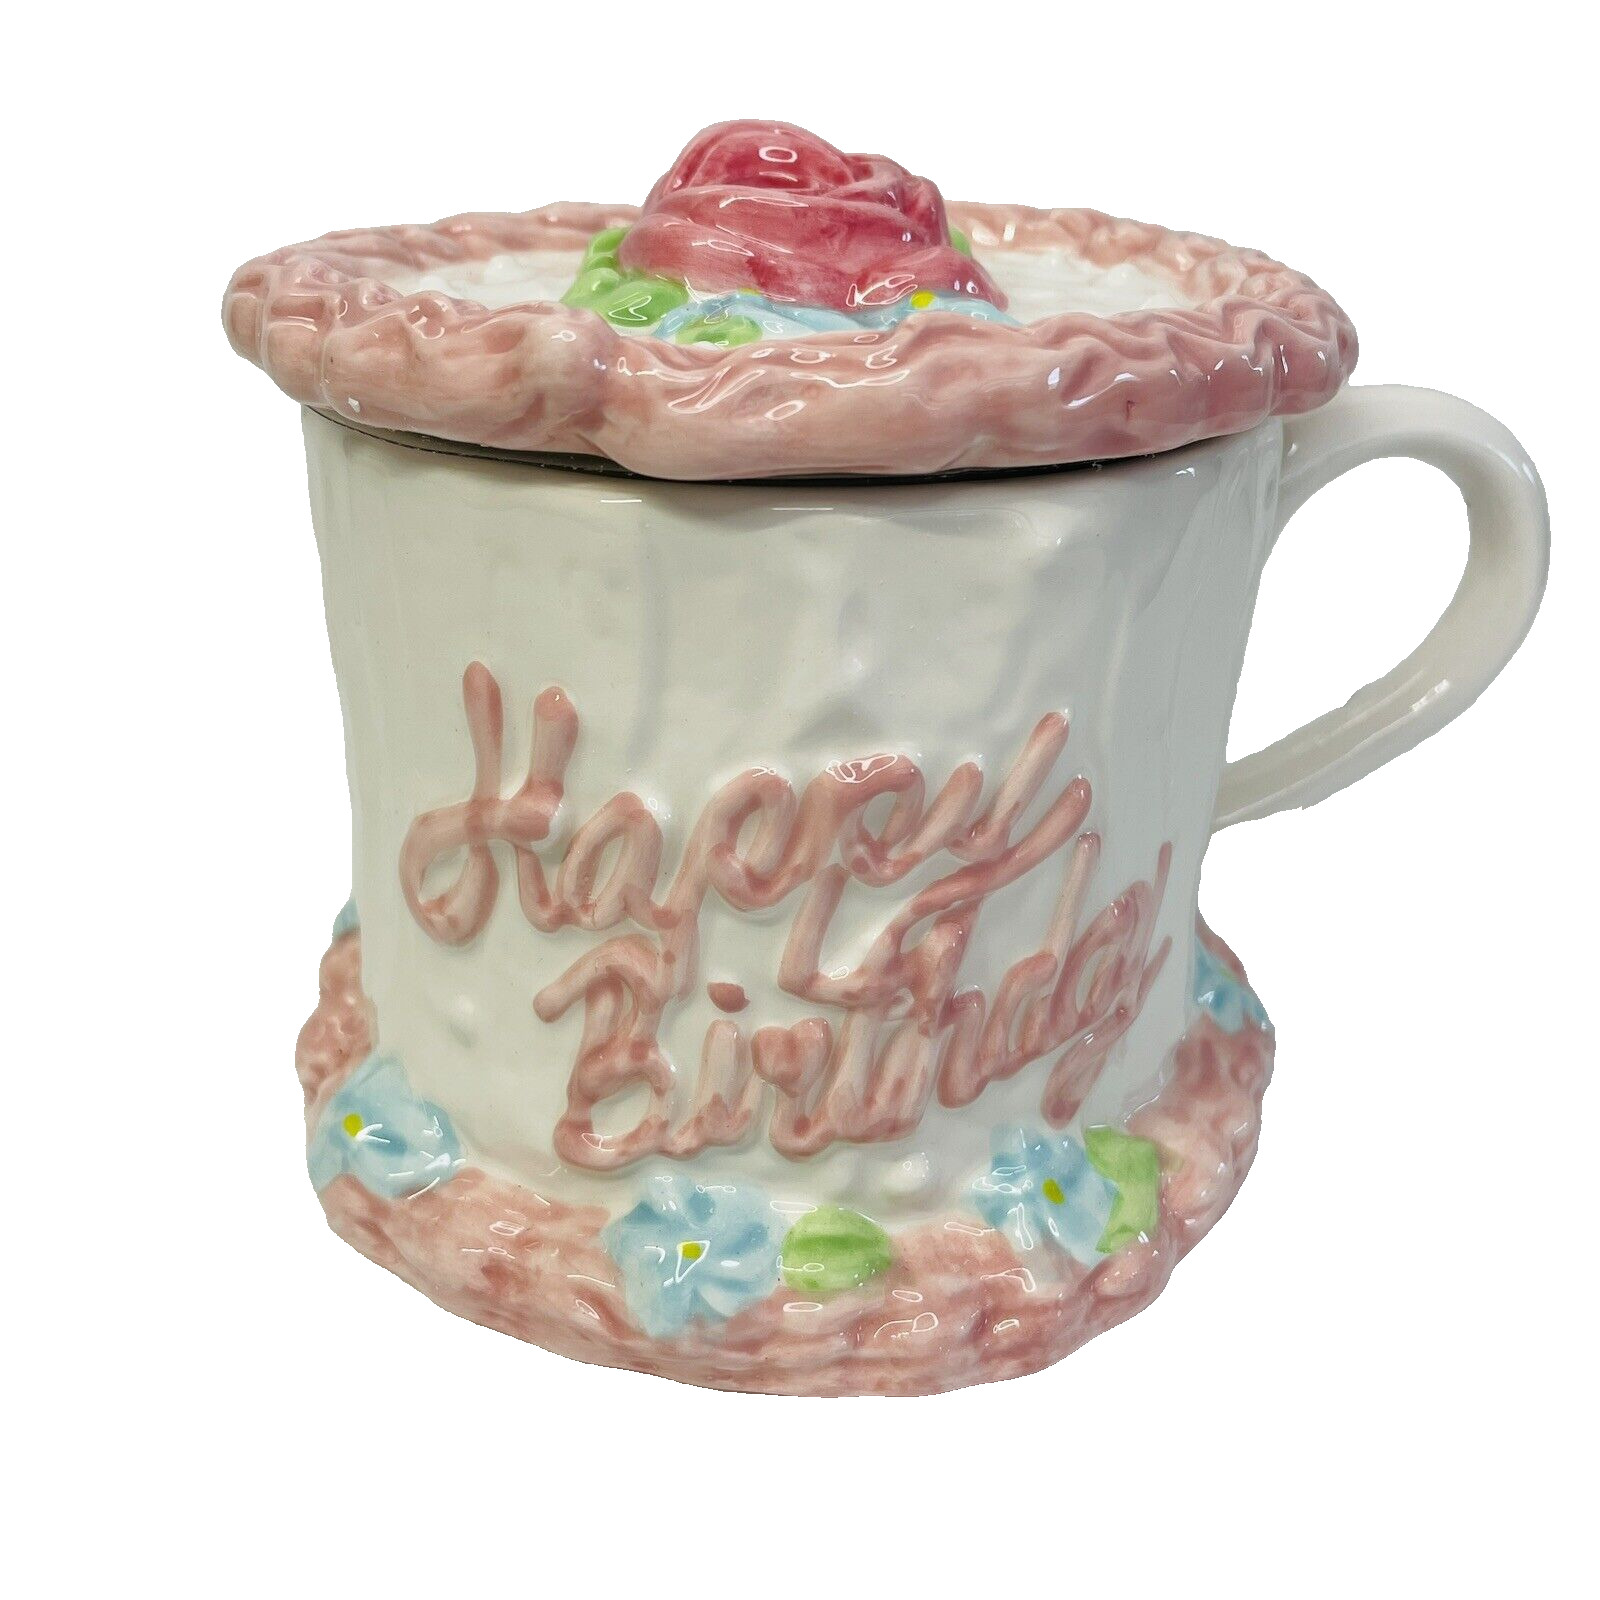 VTG NEW Teleflora Gift Happy Birthday Floral Cake Mug Covered Cup Lid Pick *flaw